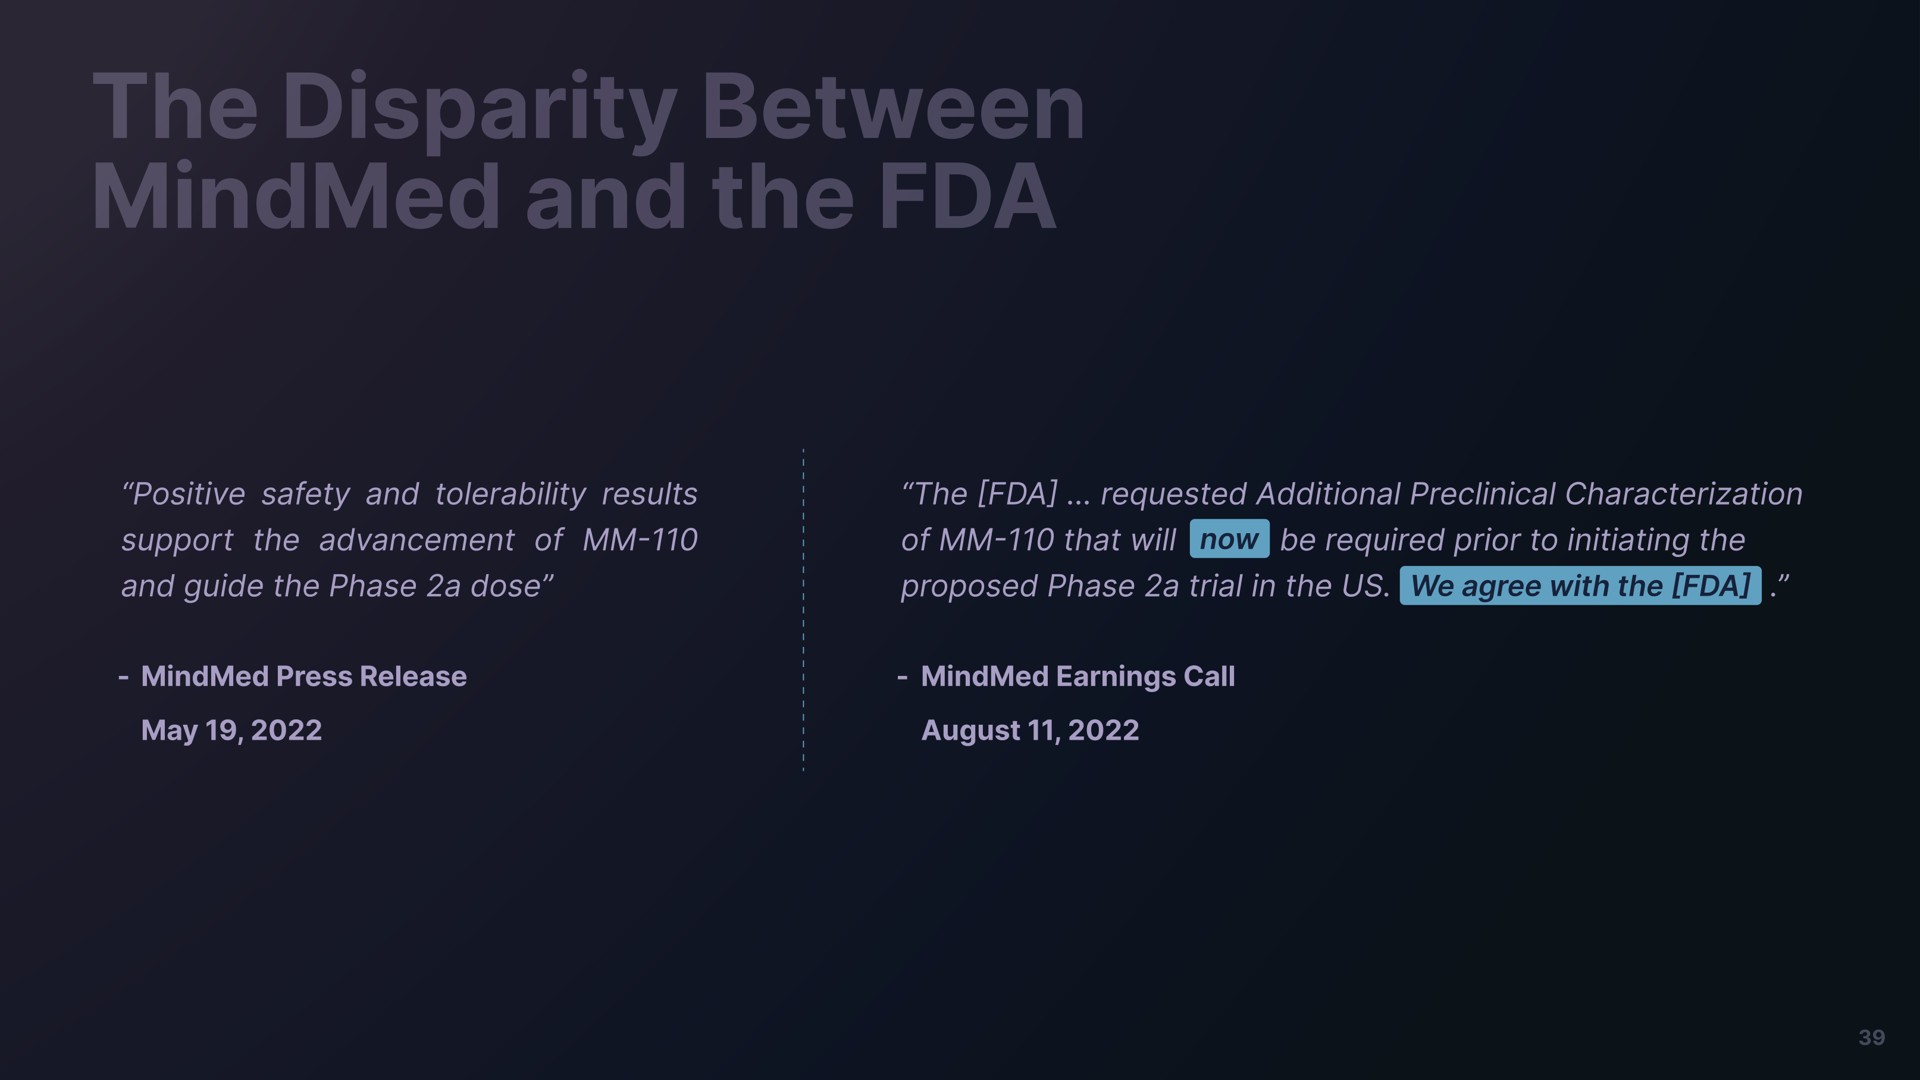 the disparity between and the proposed phase a trial in us | Freeman Capital Management